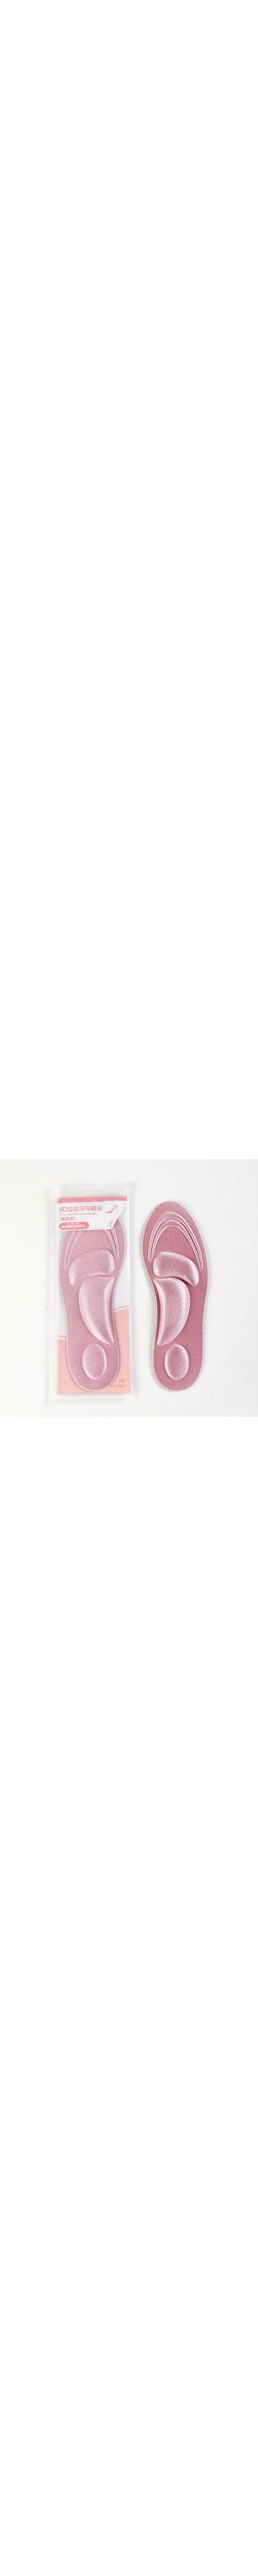 Daily insole03